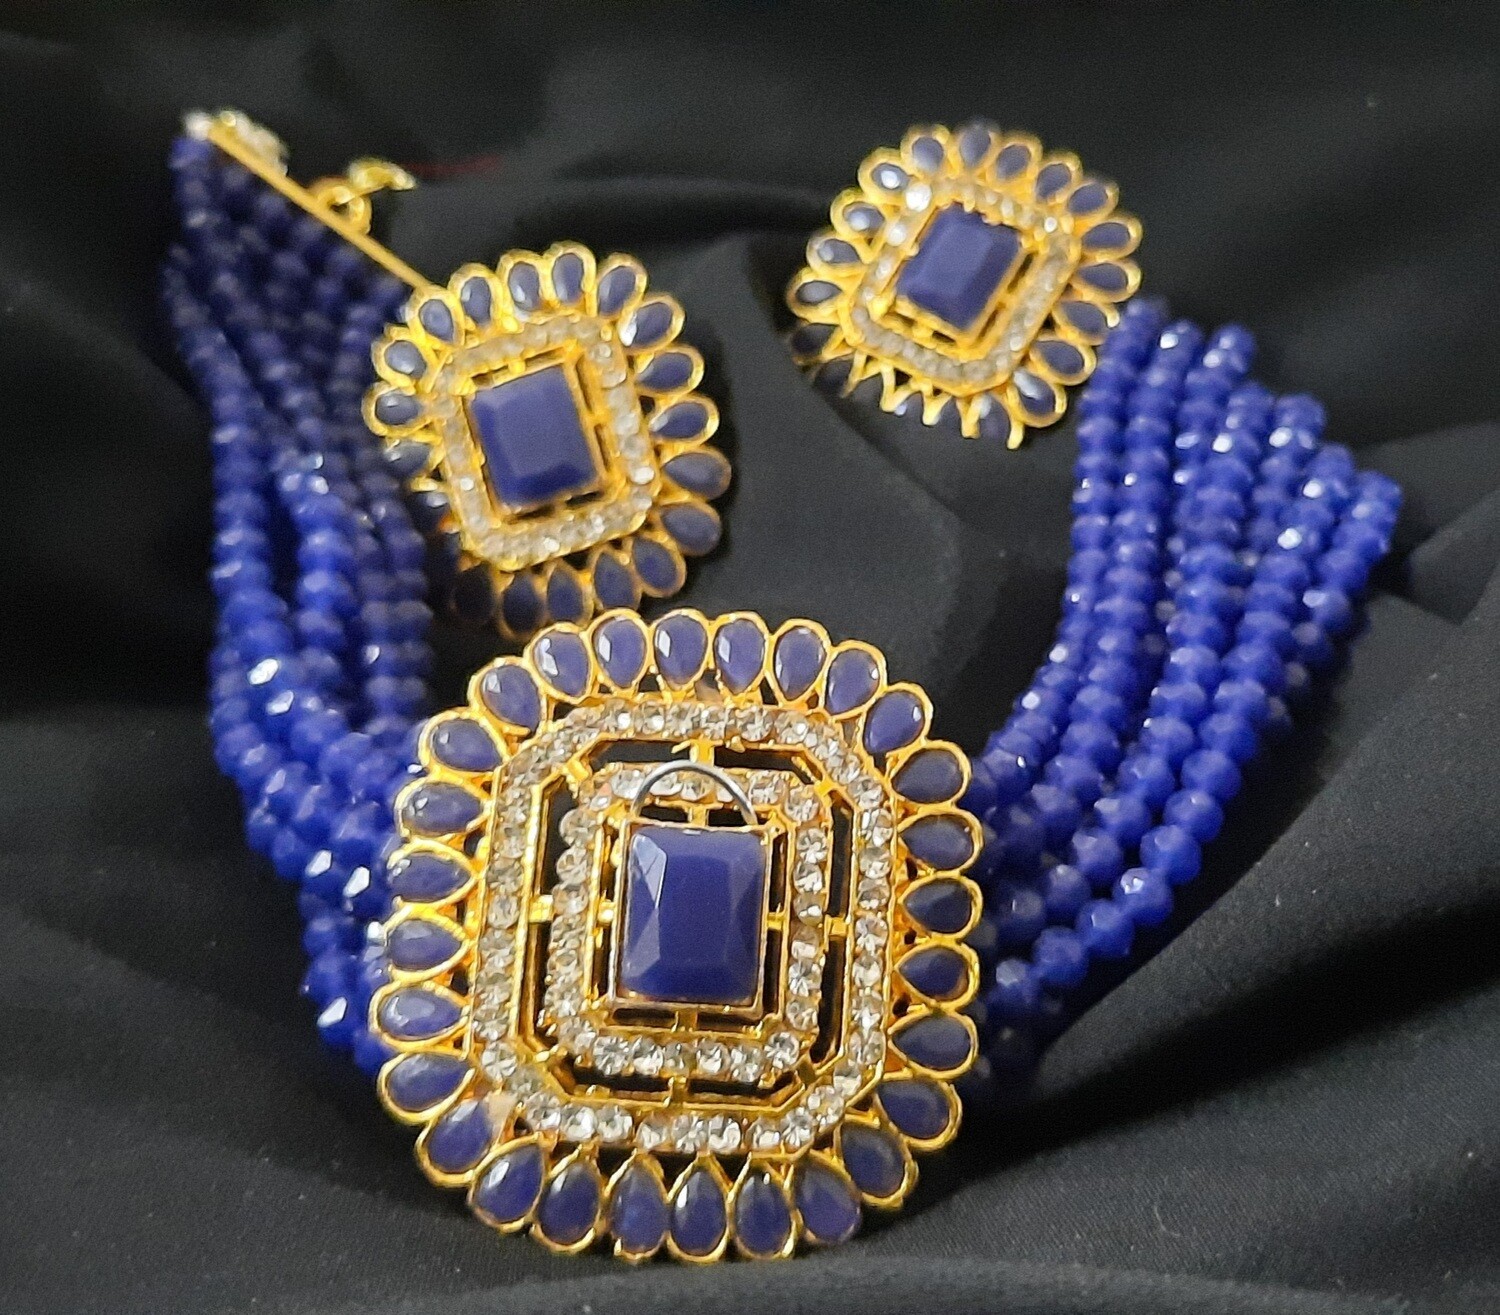 Studded Choker Necklace and Earrings Set - Blue